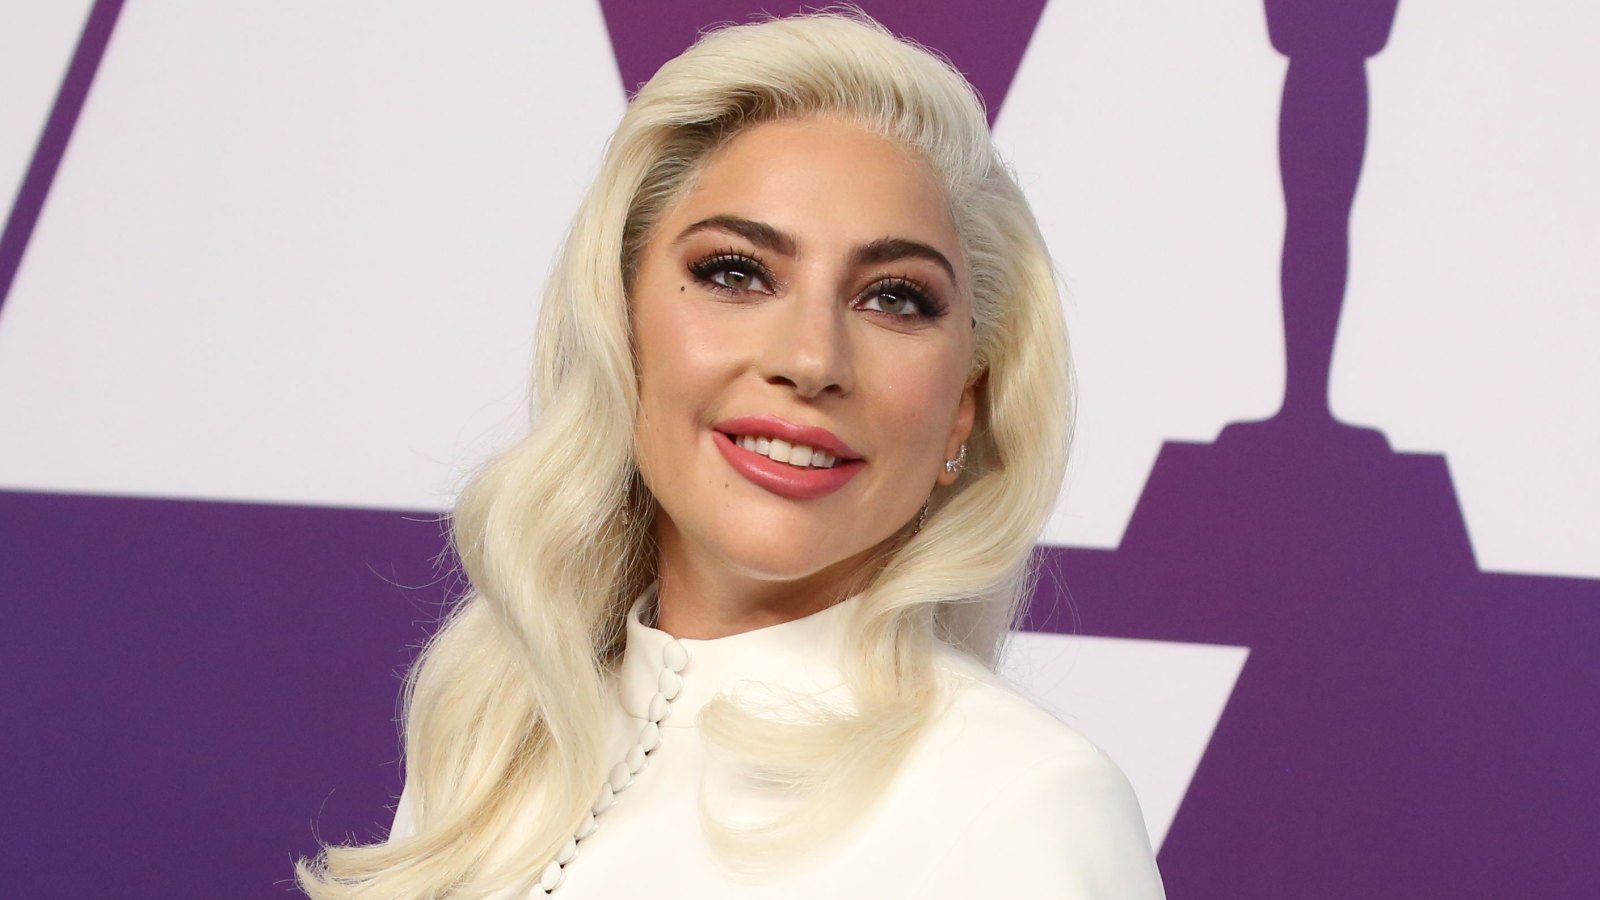 Lady Gaga Splits From Dan Horton Nearly 3 Months After Being Linked